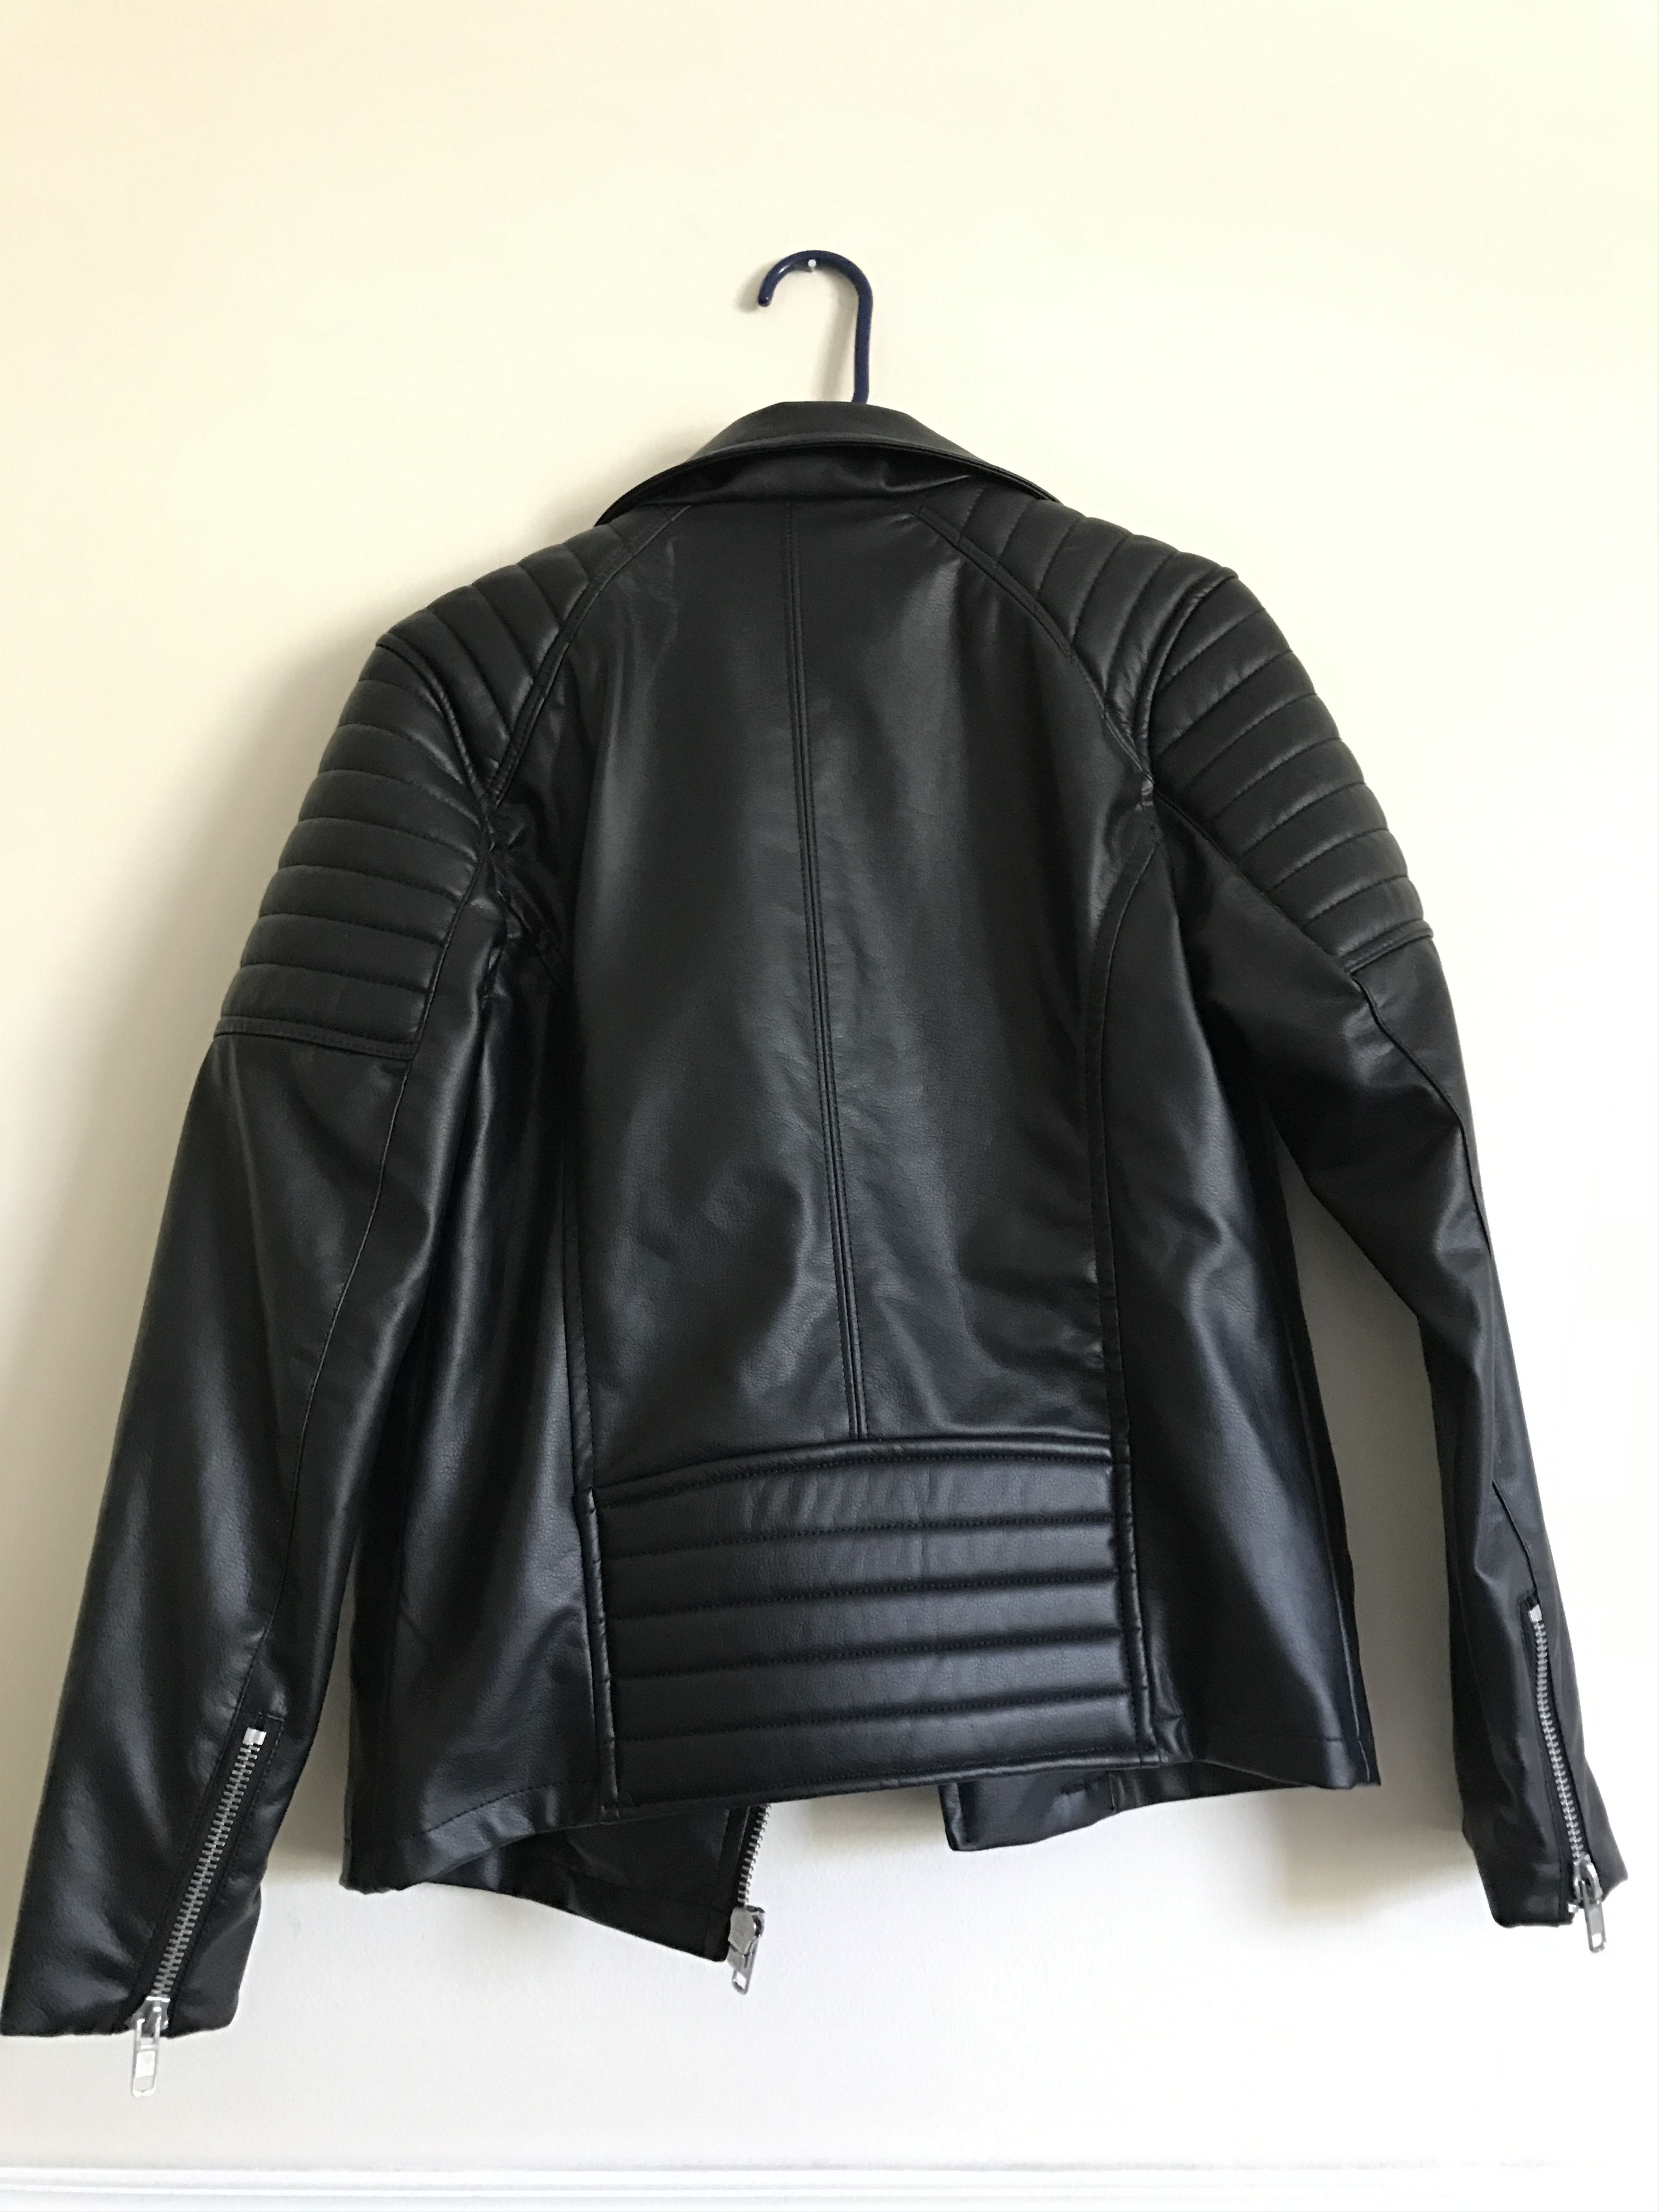 H&M Leather Jacket Size US S / EU 44-46 / 1 - 2 Preview